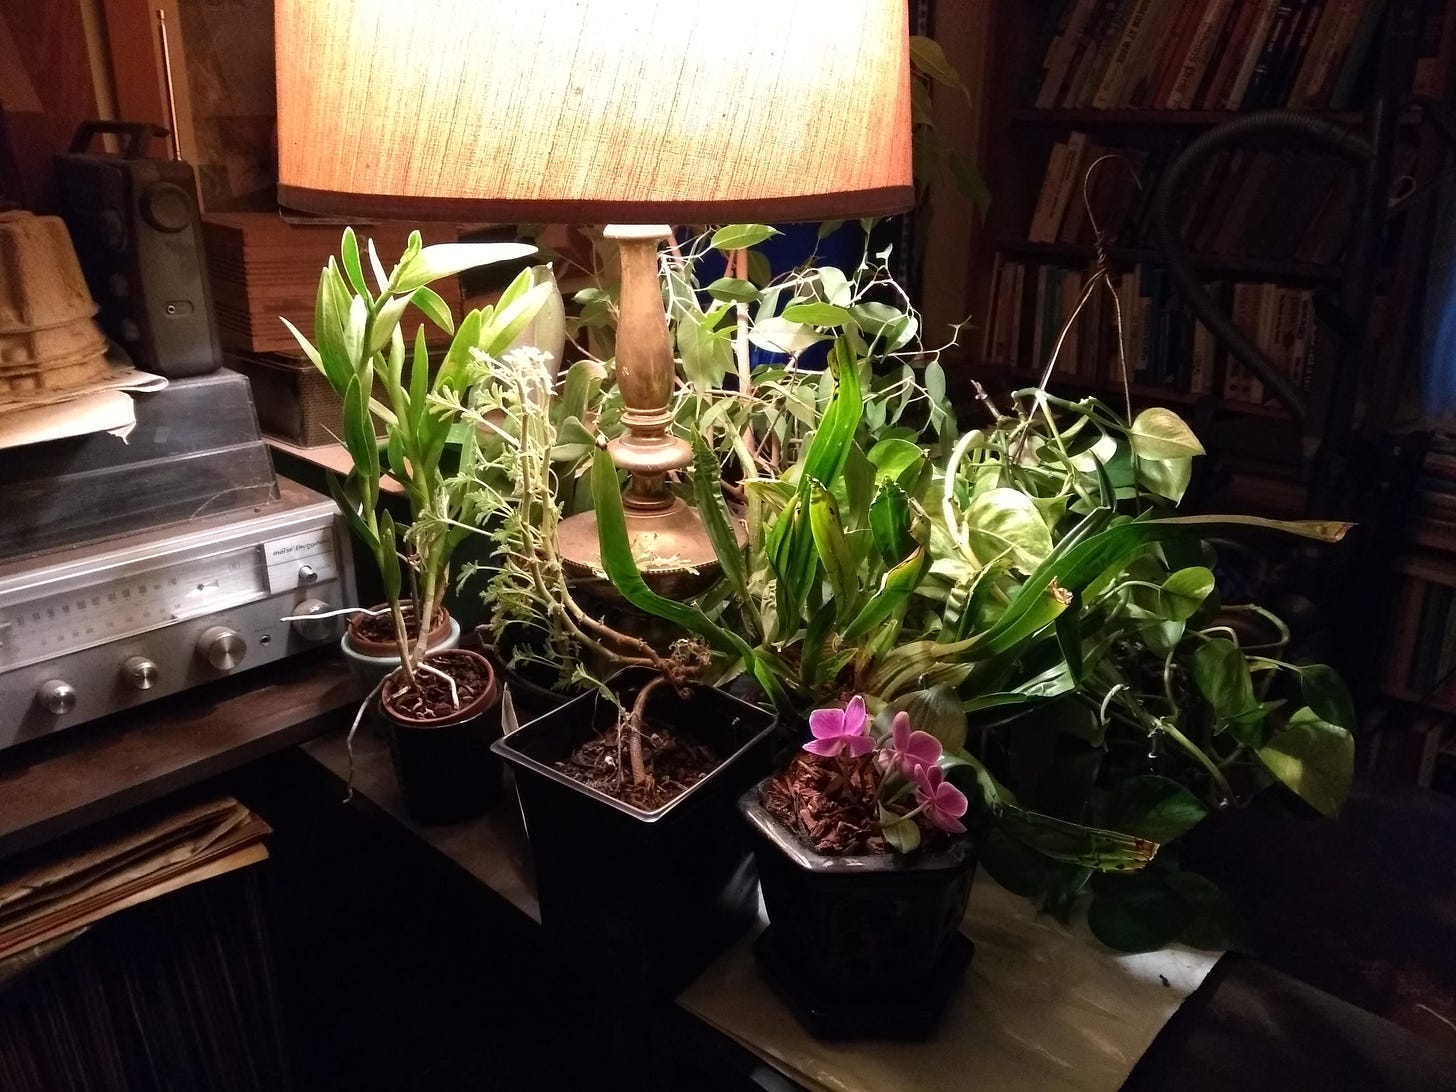 Houseplants clustered around one of the living room lamps